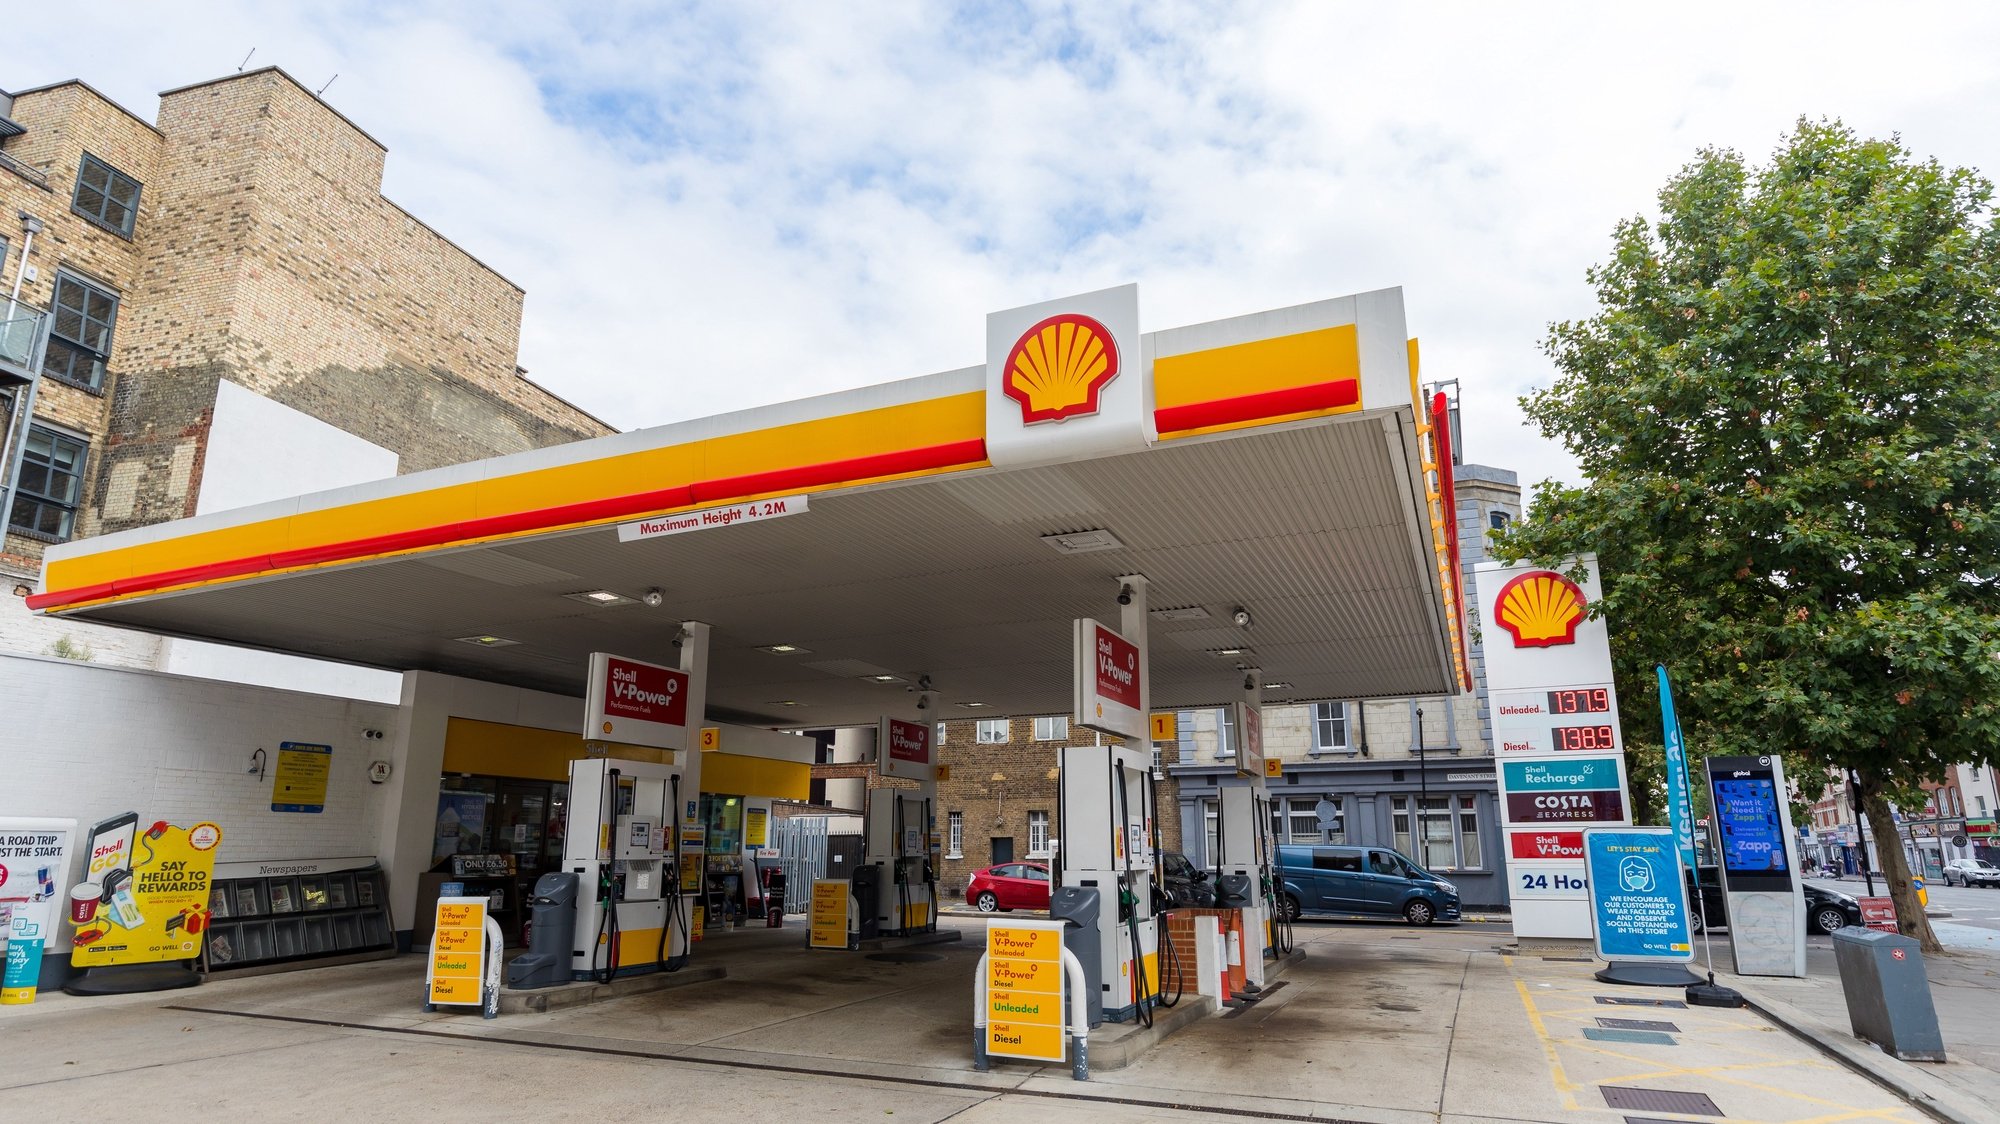 epa09457338 A Shell petrol station in London, Britain, 09 September 2021. According to a report published by Carbon Tracker, the oil giants Shell and BP will need to cut their production by at least a third each to ensure that the planet does not heat up by more than 1.5 degrees Celsius.  EPA/VICKIE FLORES